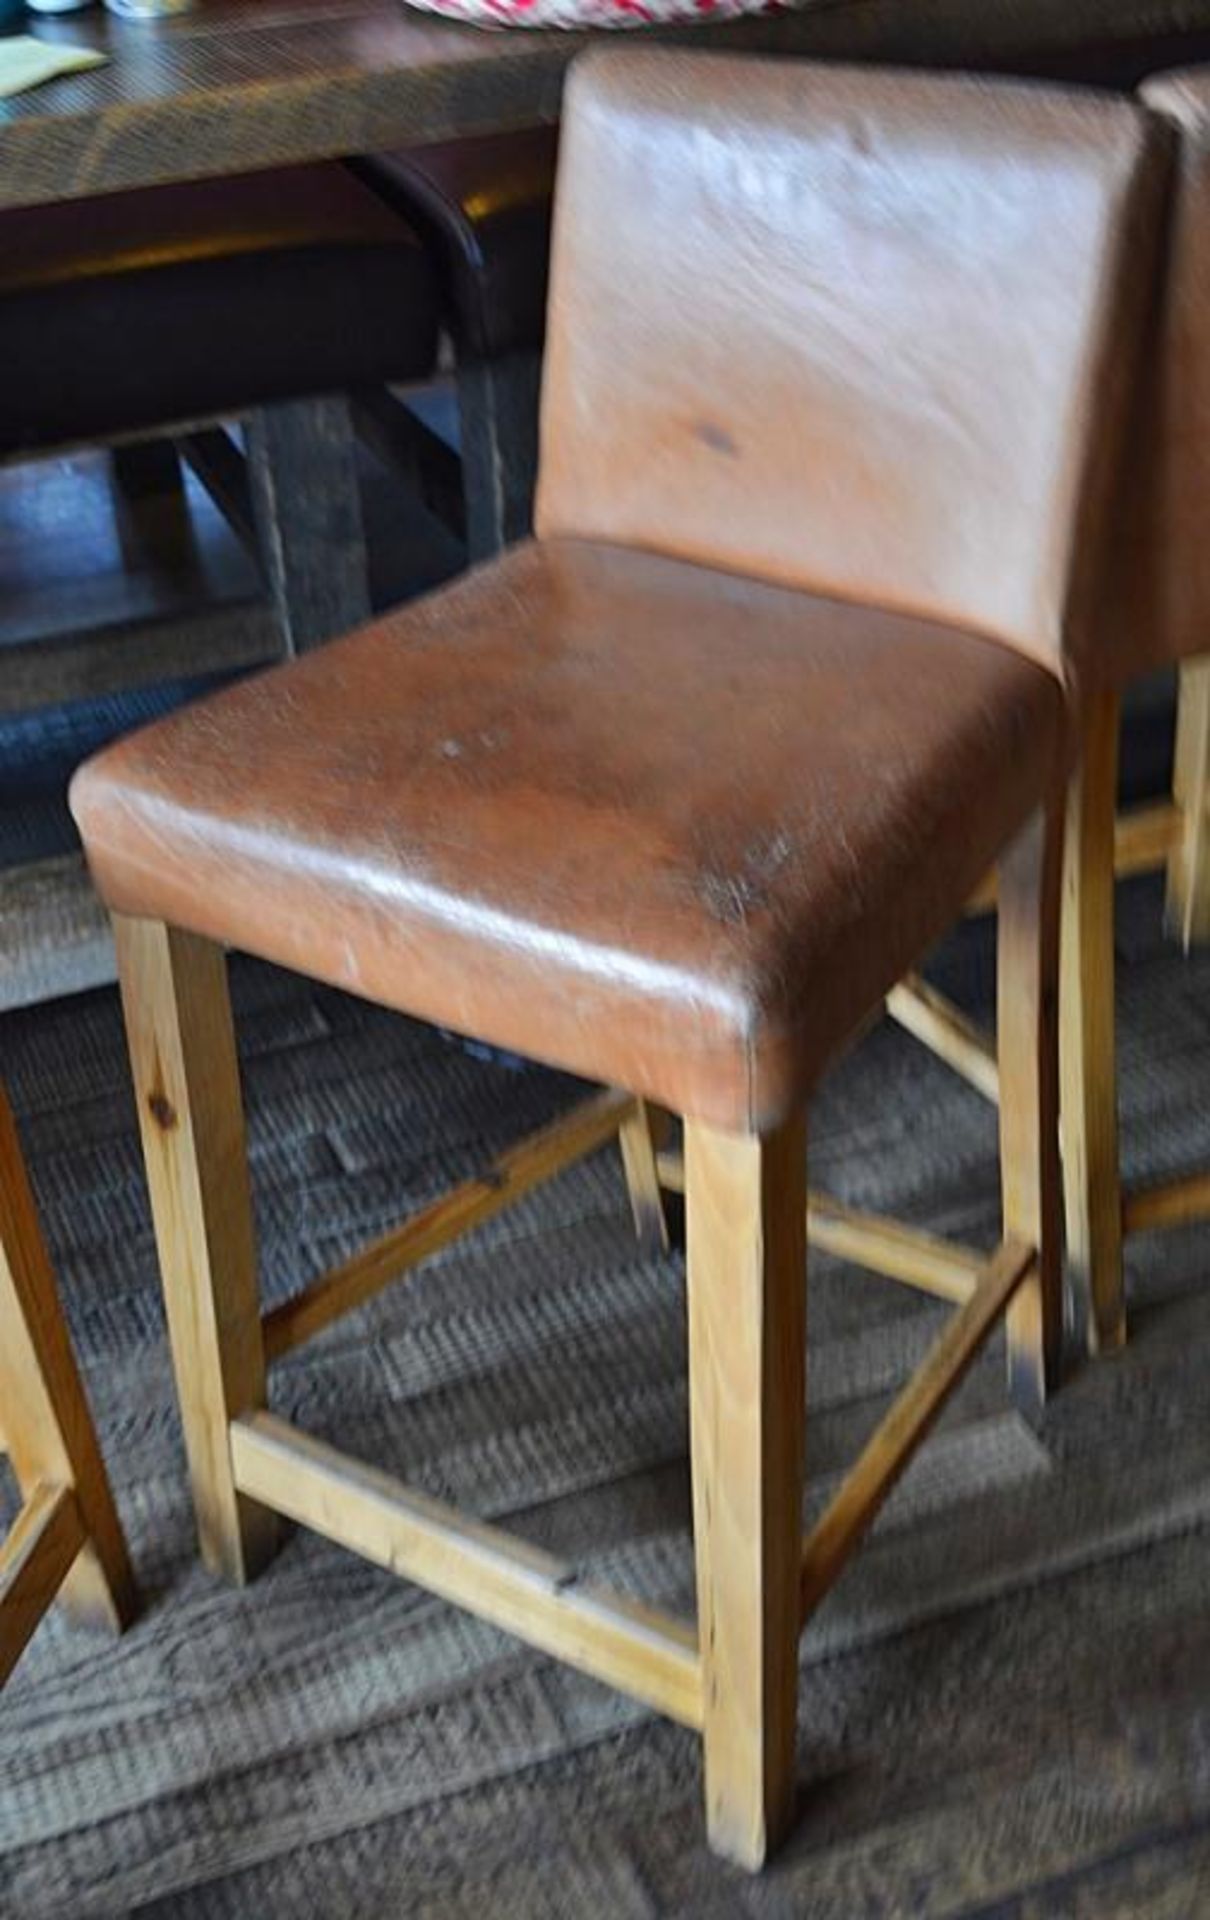 8 x Wooden Bar Stools With Faux Leather Seats in Various Colours - CL363 - Location: Stevenage SG1 - Image 5 of 5